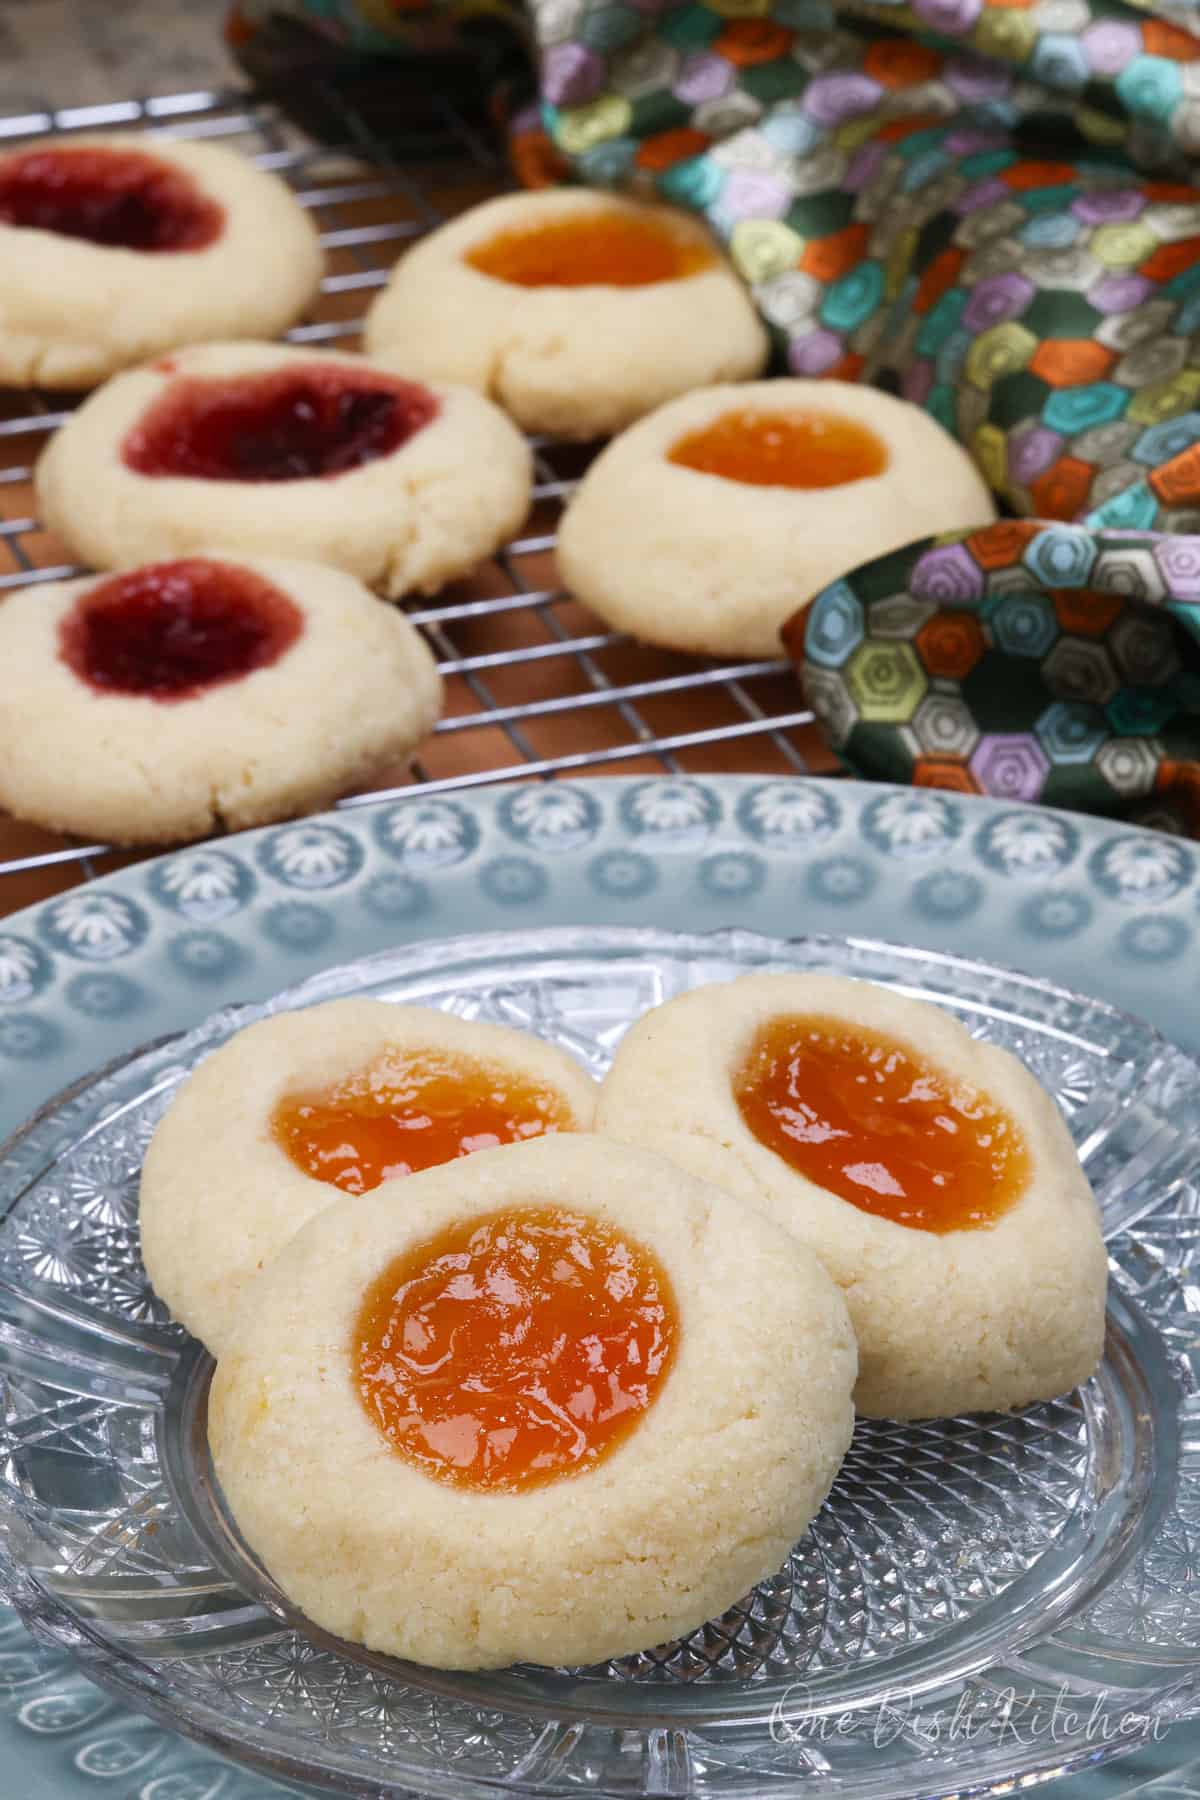 an assortment or raspberry filled thumbprint cookies next to cookies filled with orange marmalade.